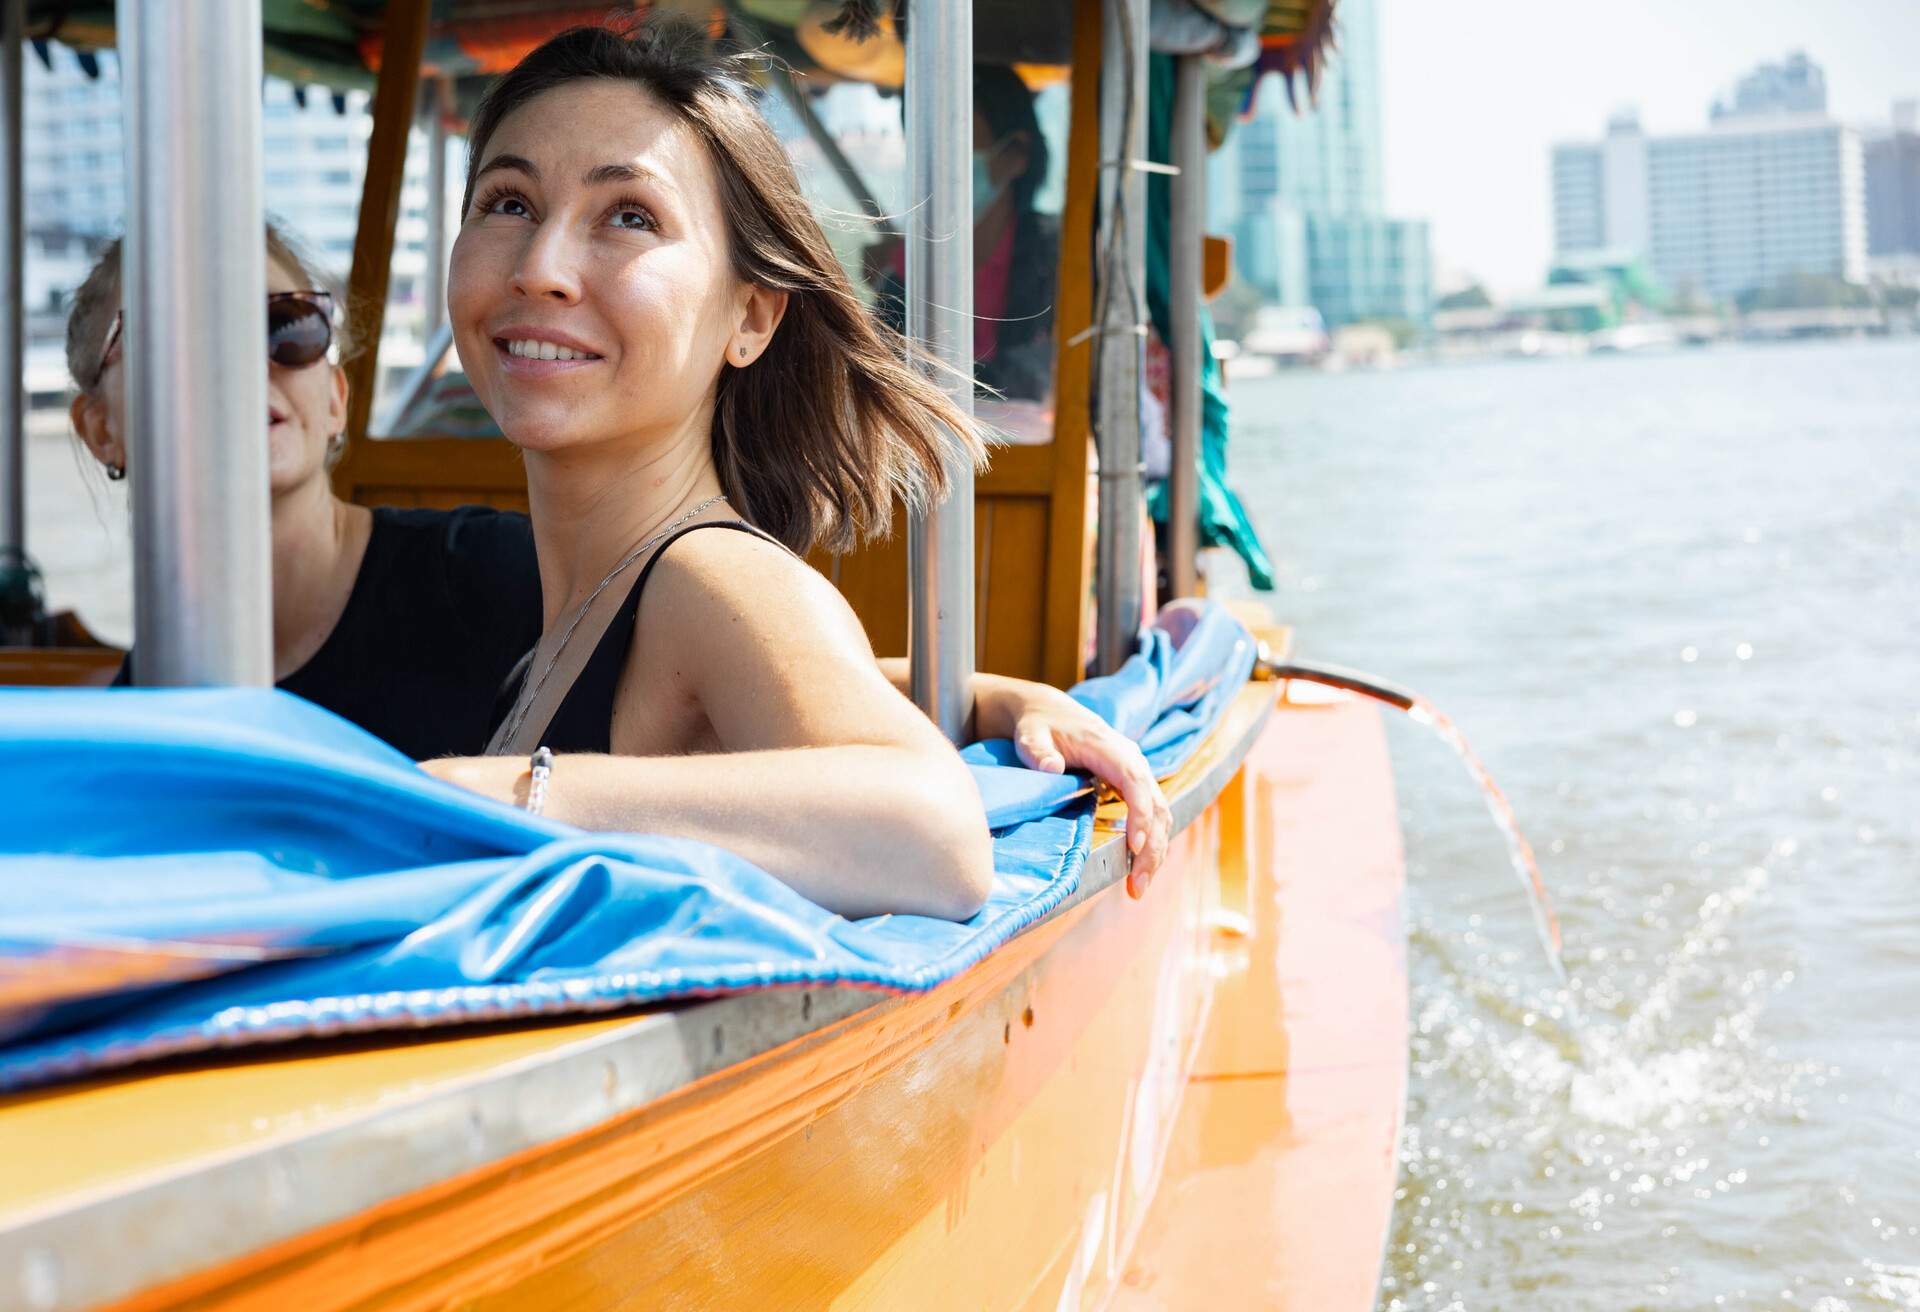 DEST_THAILAND_PEOPLE_WOMAN_BOAT_GettyImages-1393967503.jpg